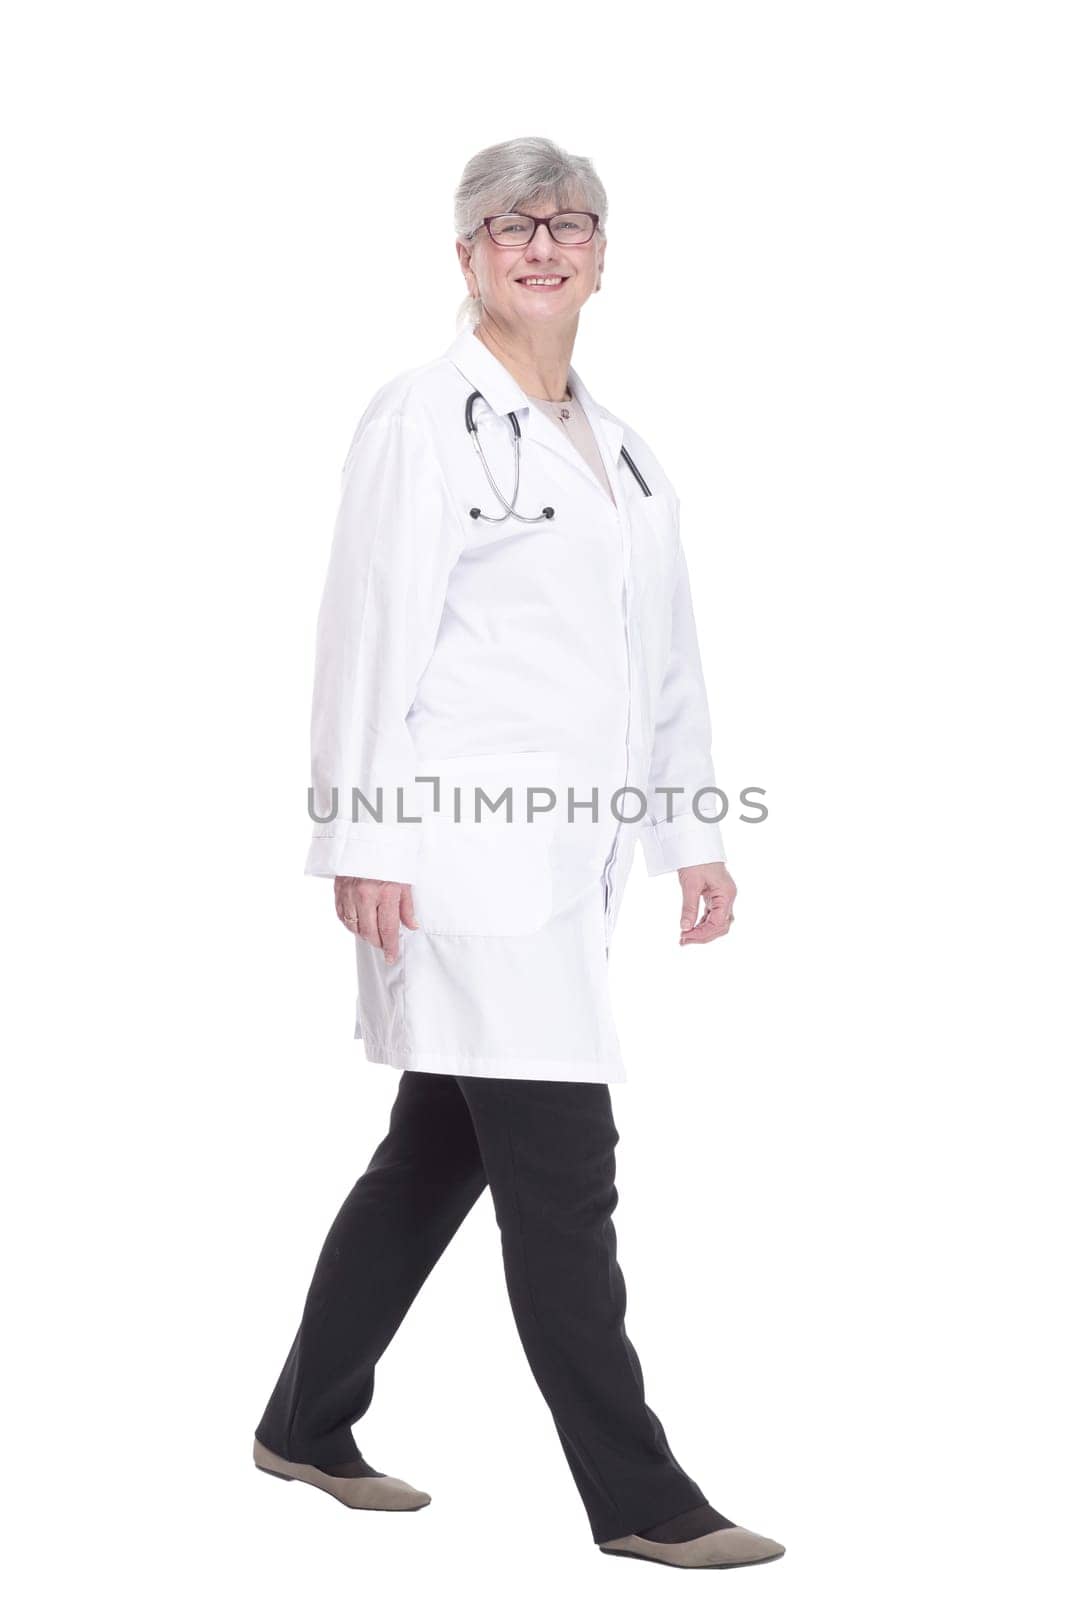 in full growth. happy woman doctor striding forward. isolated on a white background.